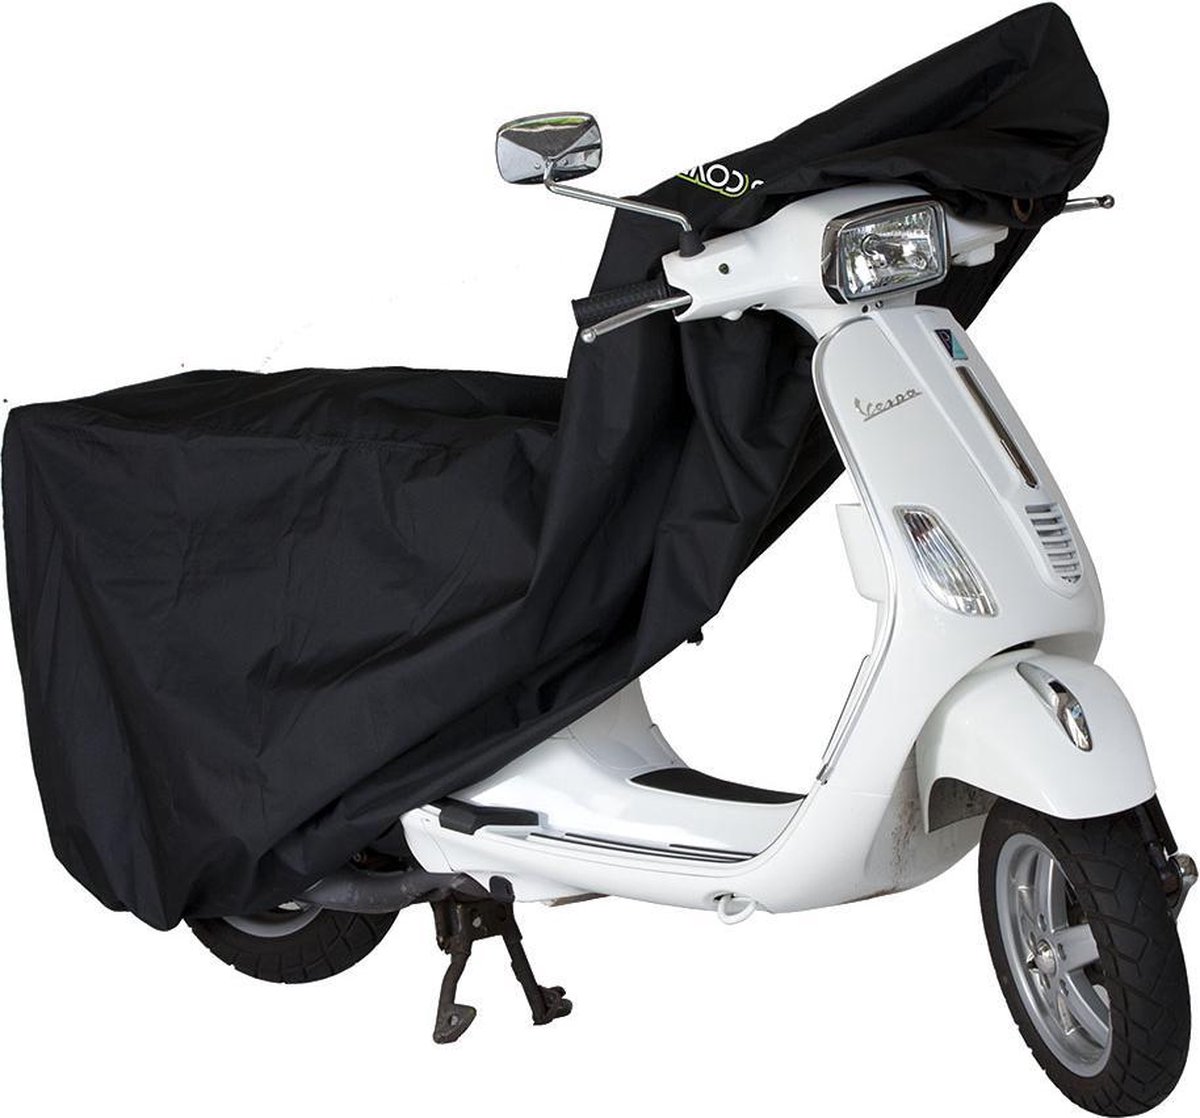 Scooterhoes Ds Covers Cup Large - Zwart